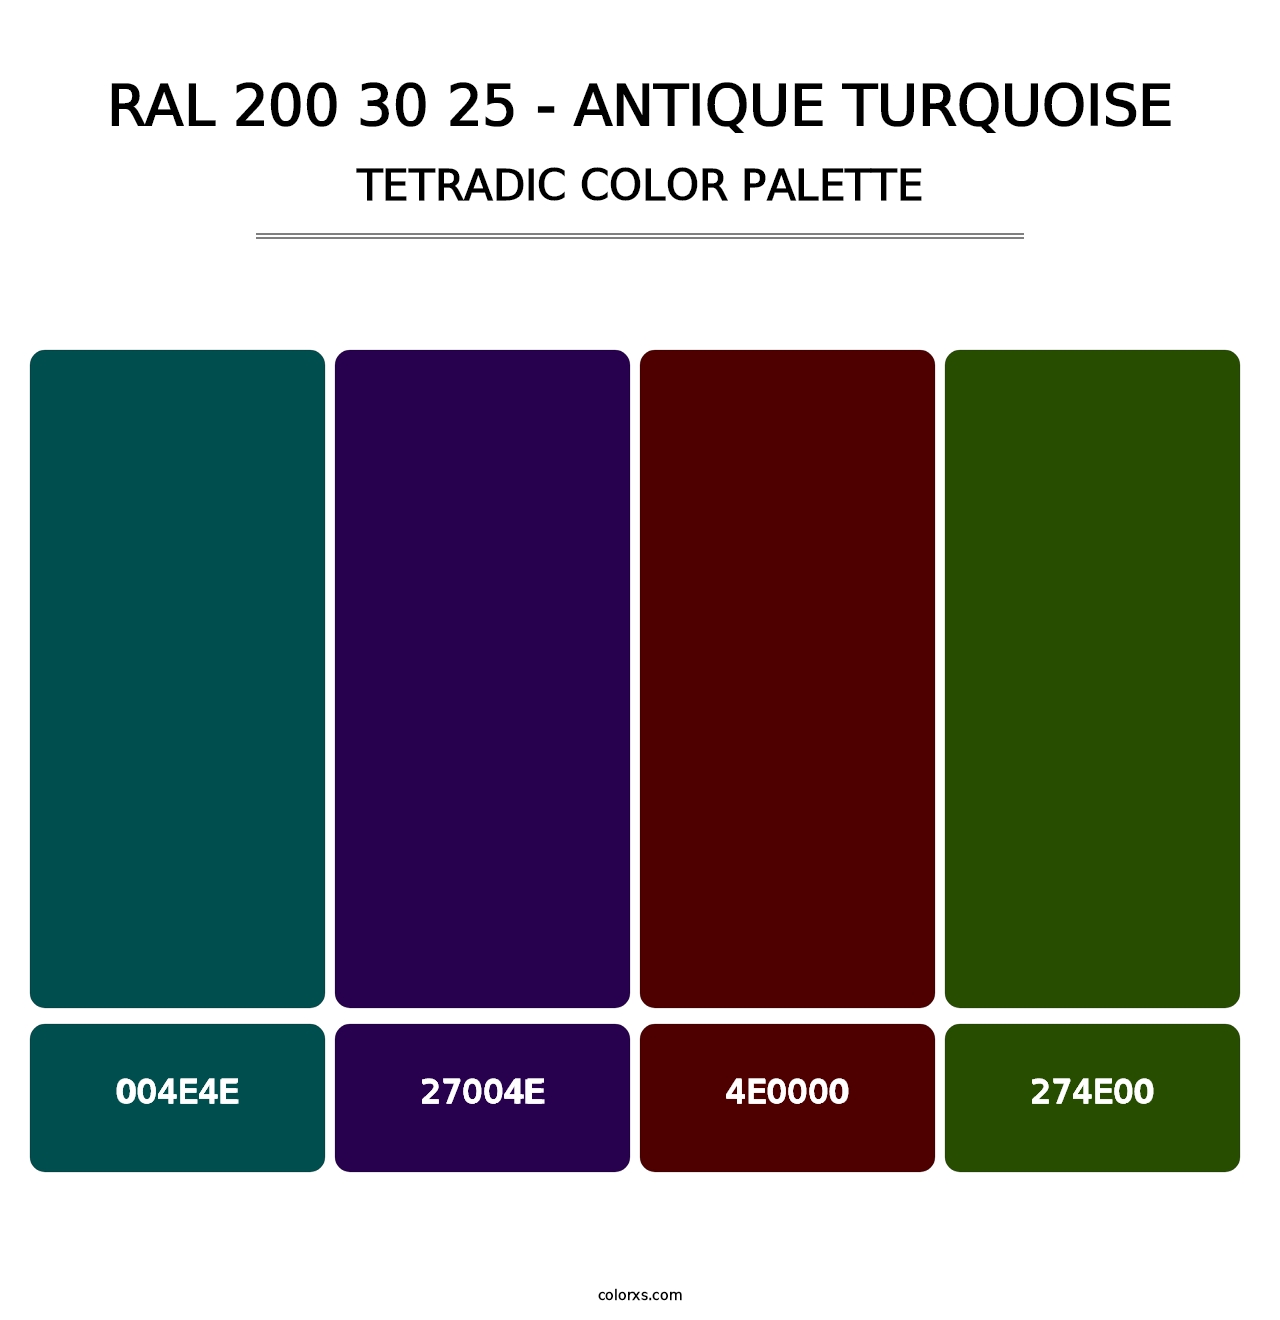 RAL 200 30 25 - Antique Turquoise - Tetradic Color Palette